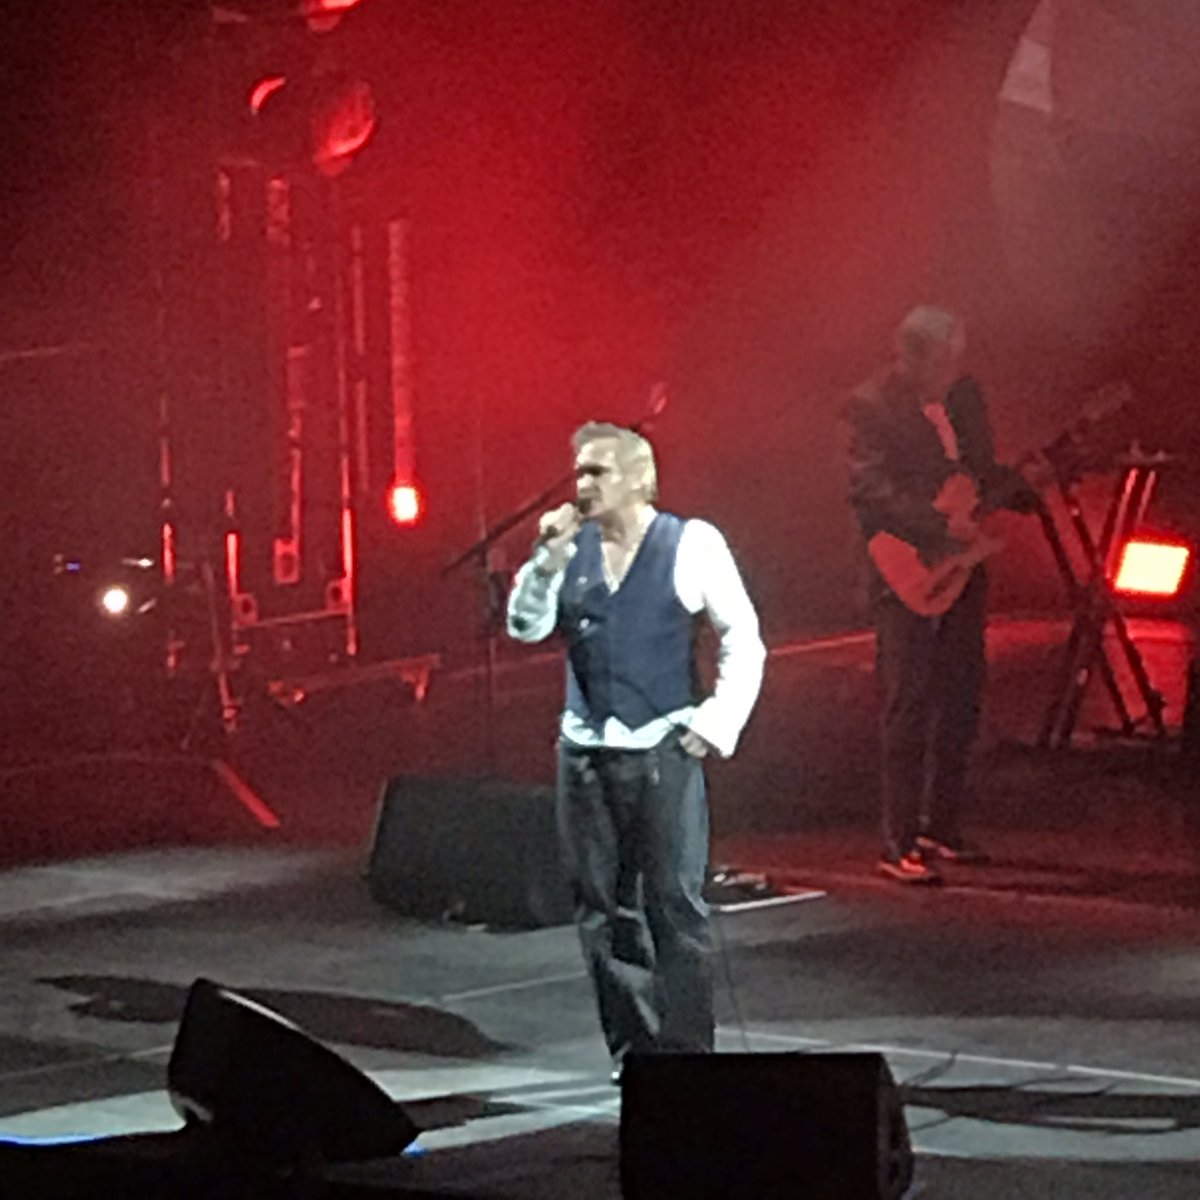 Well, @SluggoDoug @richardblade @SwedishEgil I just took my 15-year-old son to see @officialmoz and it was an amazing show!!  My first #Moz show after being a fan for 34 years!  #MorrisseyTour2019 #Morrissey #ThisCharmingMan